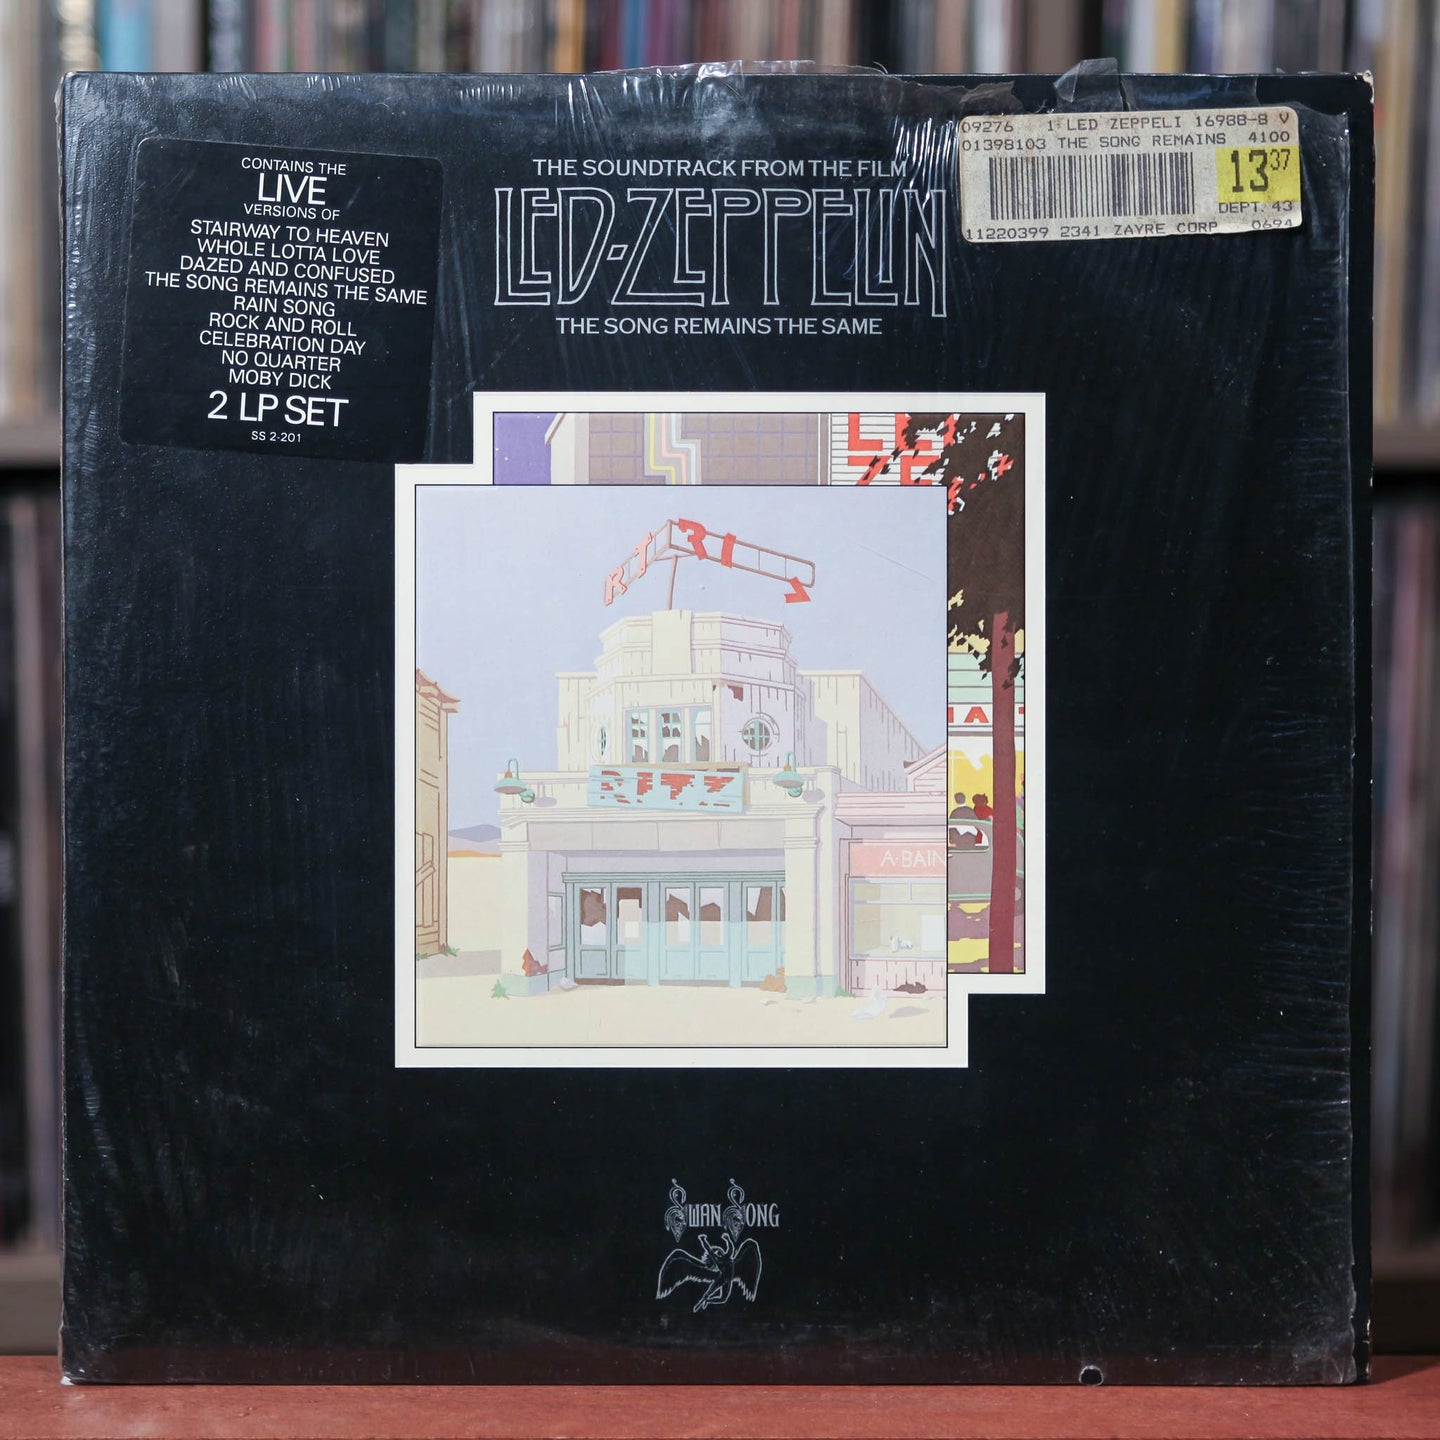 Led Zeppelin - The Song Remains The Same - 2LP - 1976 Swan Song, EX/VG w/Shrink